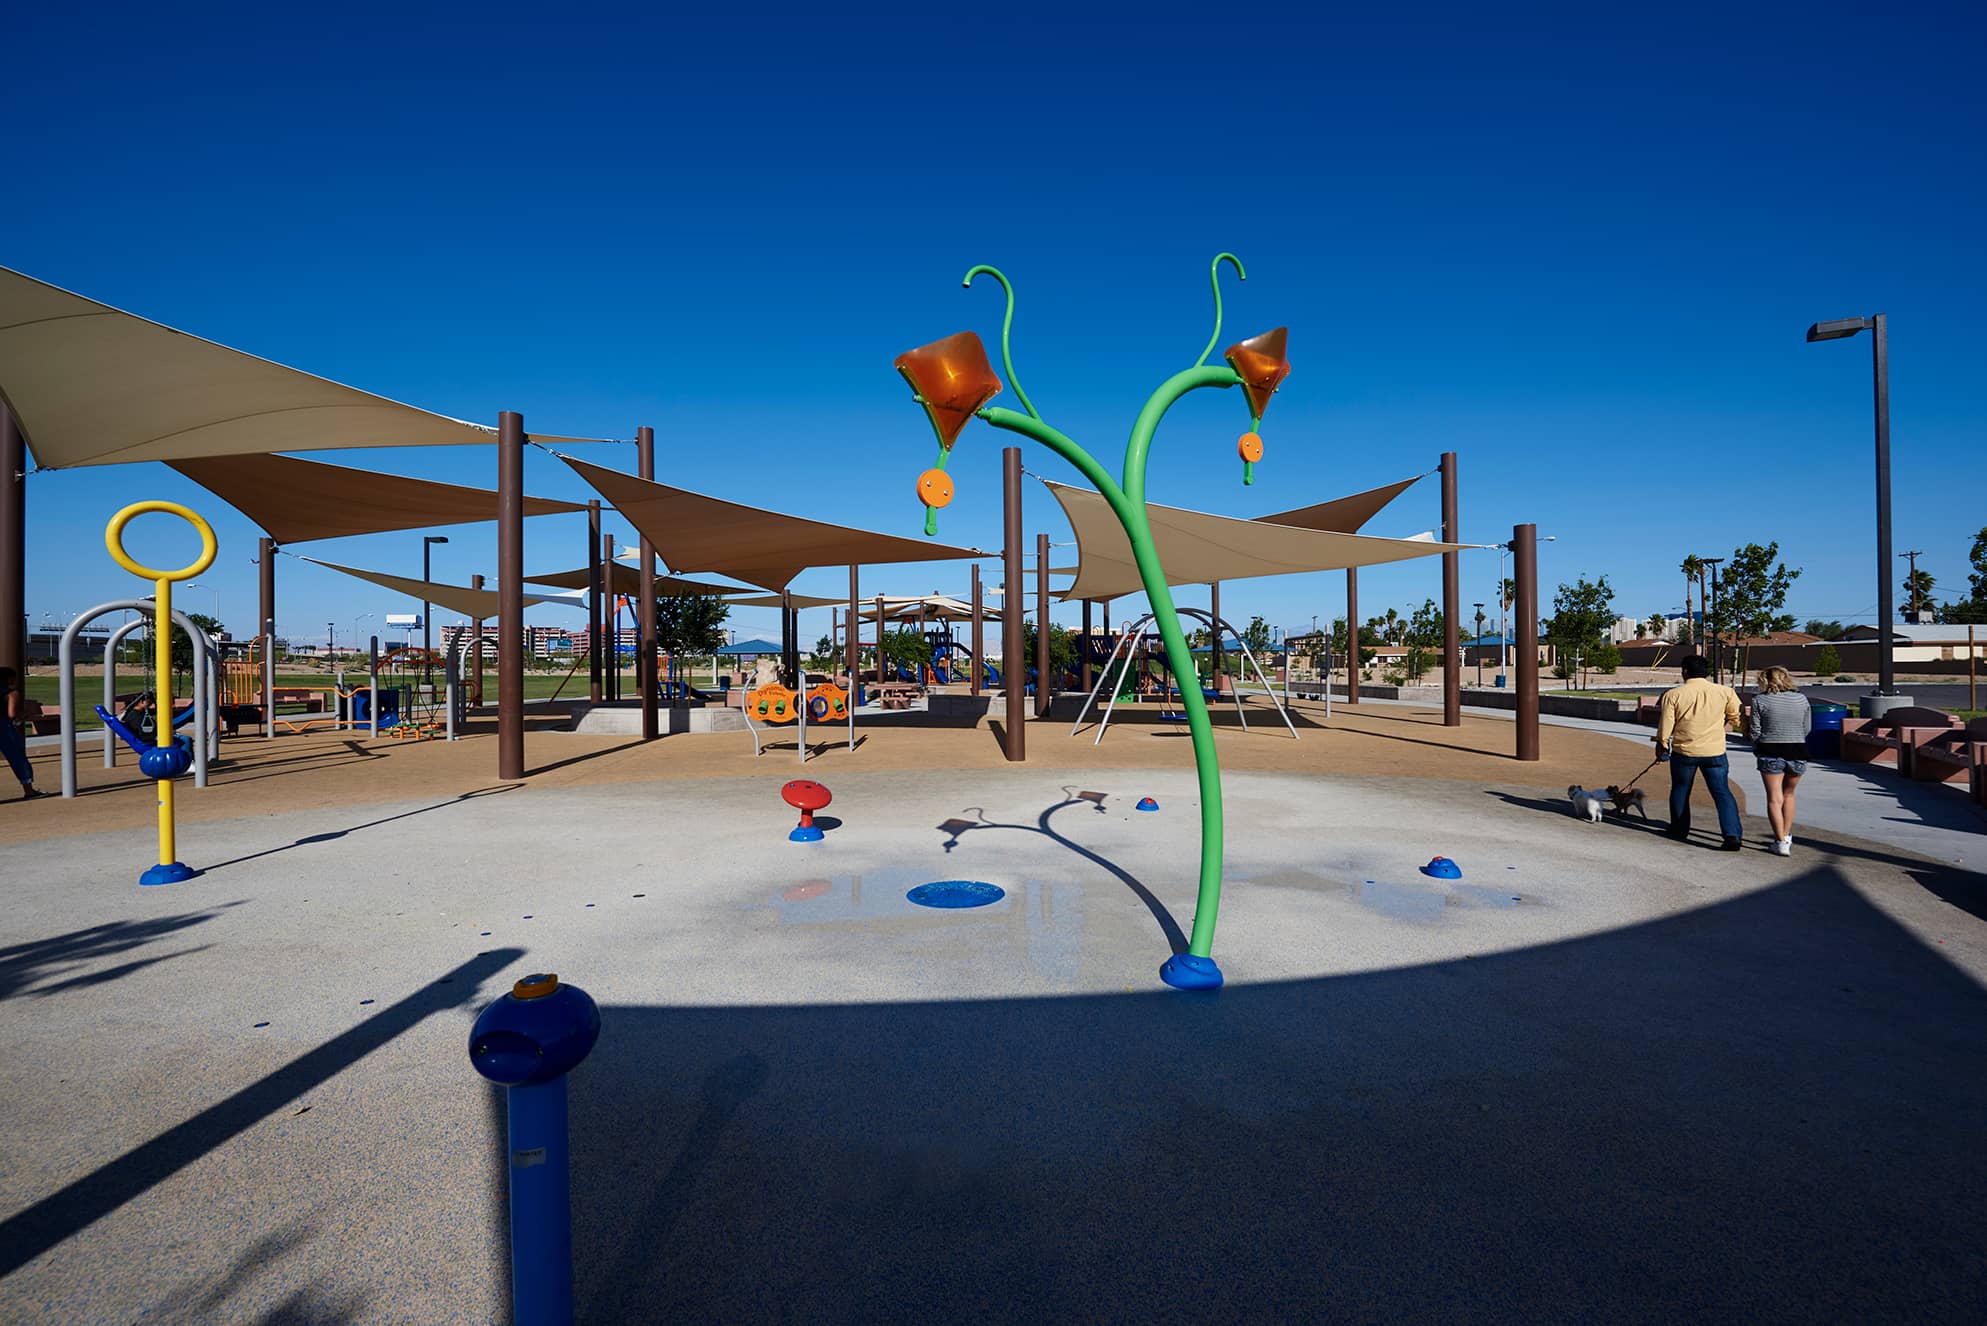 Kimley-Horn designed and provided landscape architecture services for the 20-acre Siegfried and Roy Park in Las Vegas, Nevada.